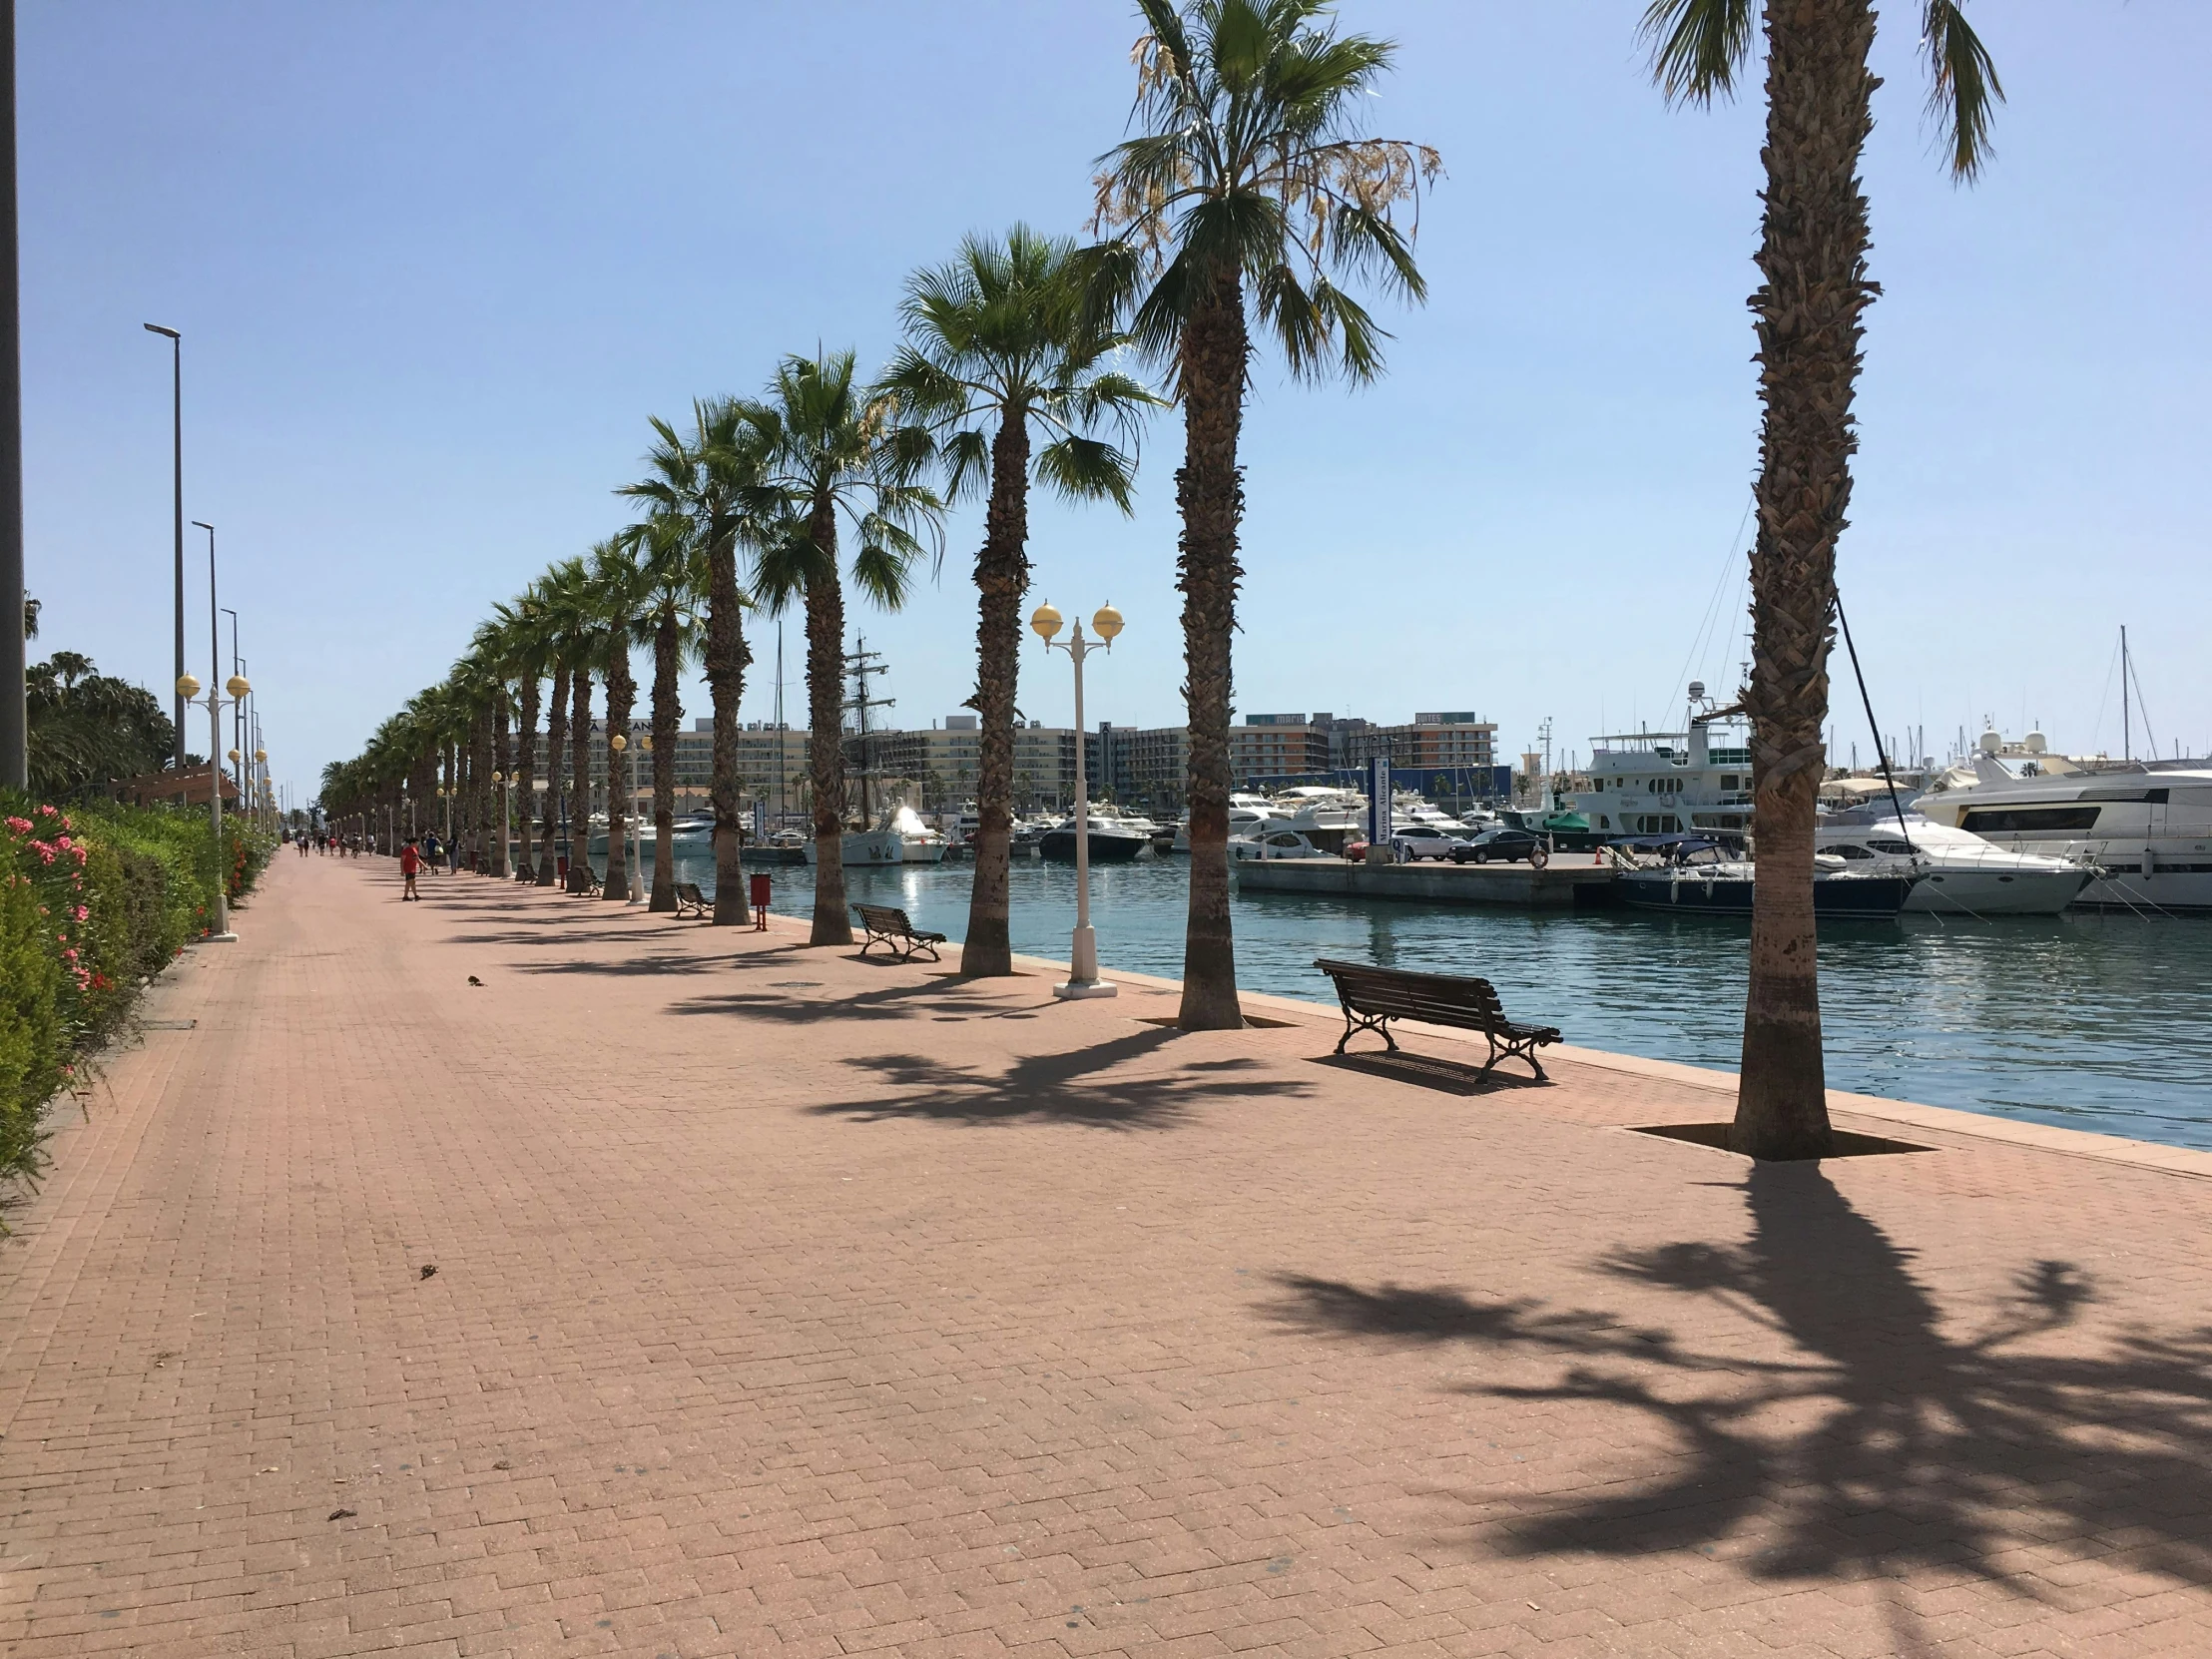 palm trees are lined up along the shoreline